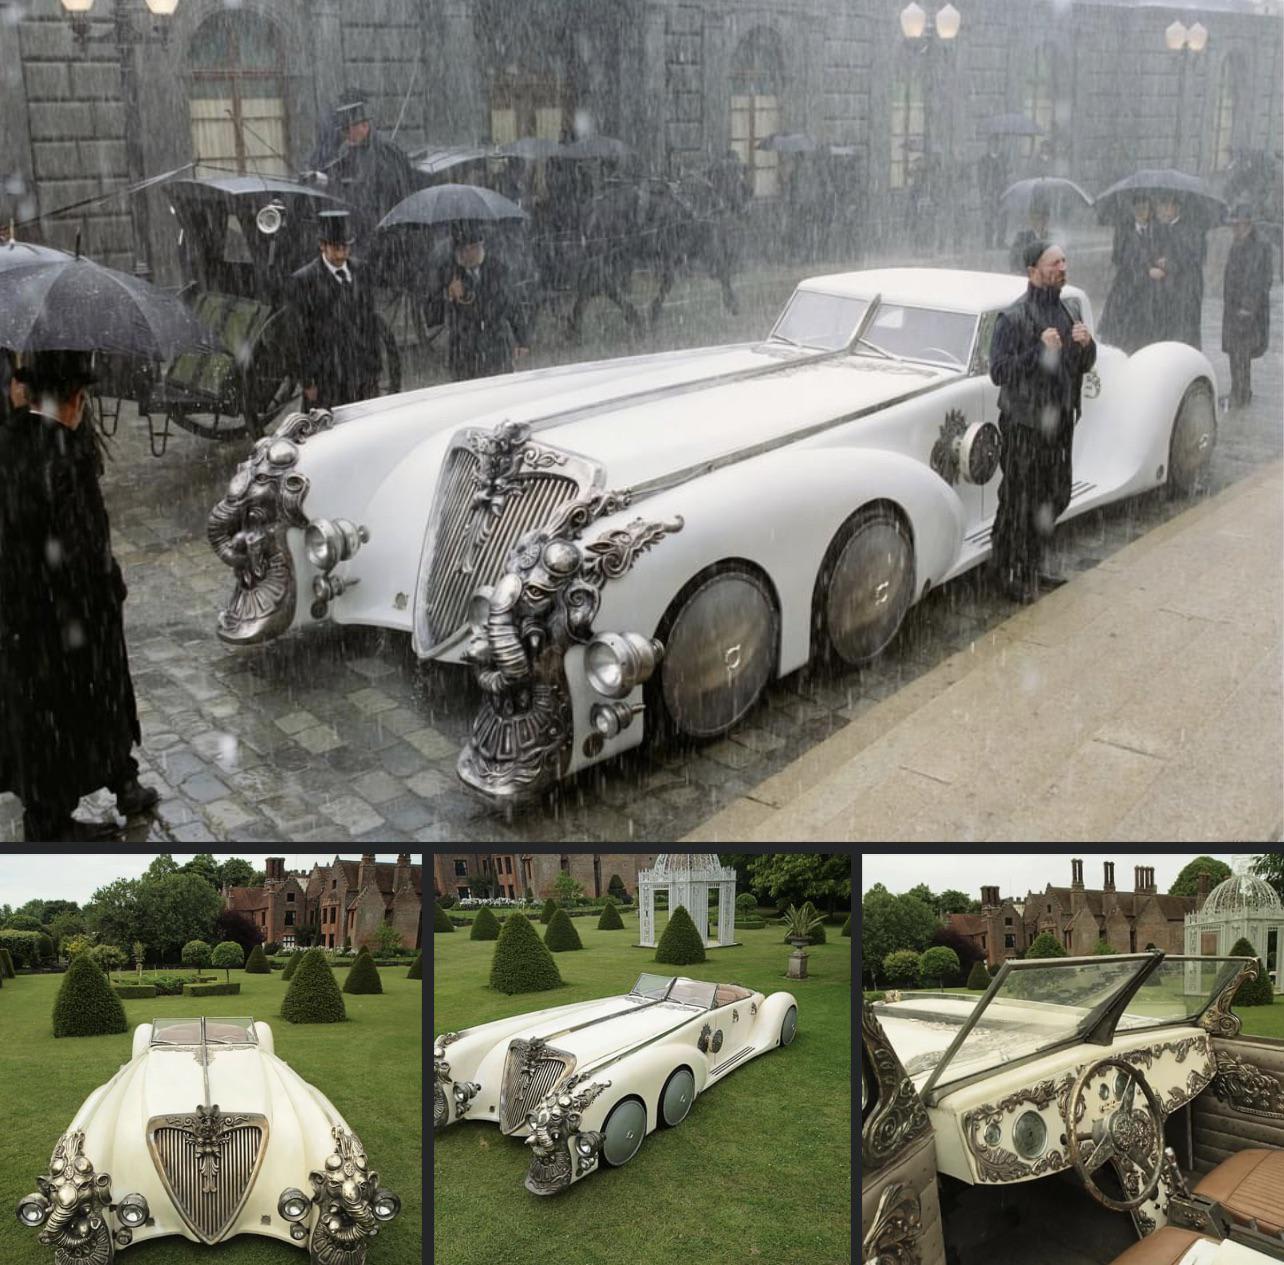 One of the greatest Weird Wheels of all time… Captain Nemo’s Nautilus